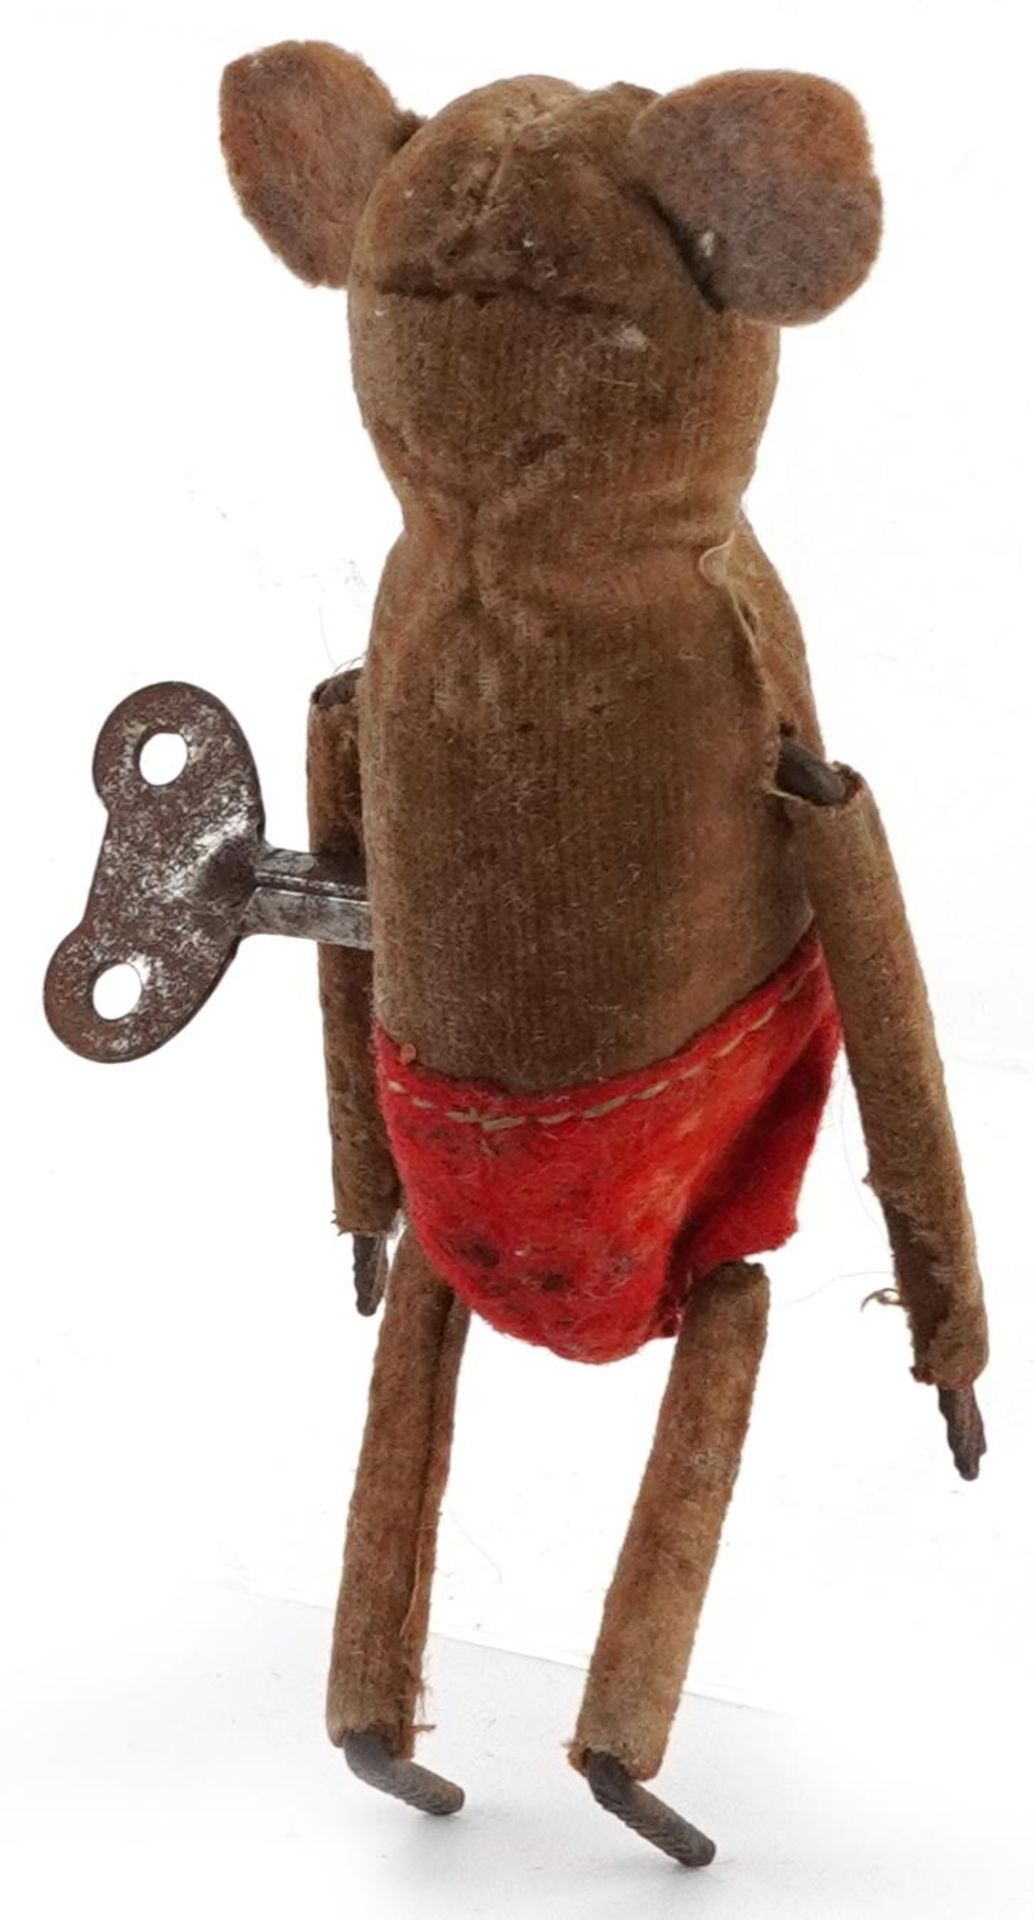 Early 20th century wind up clockwork mouse, possibly German, 10cm high - Image 2 of 3